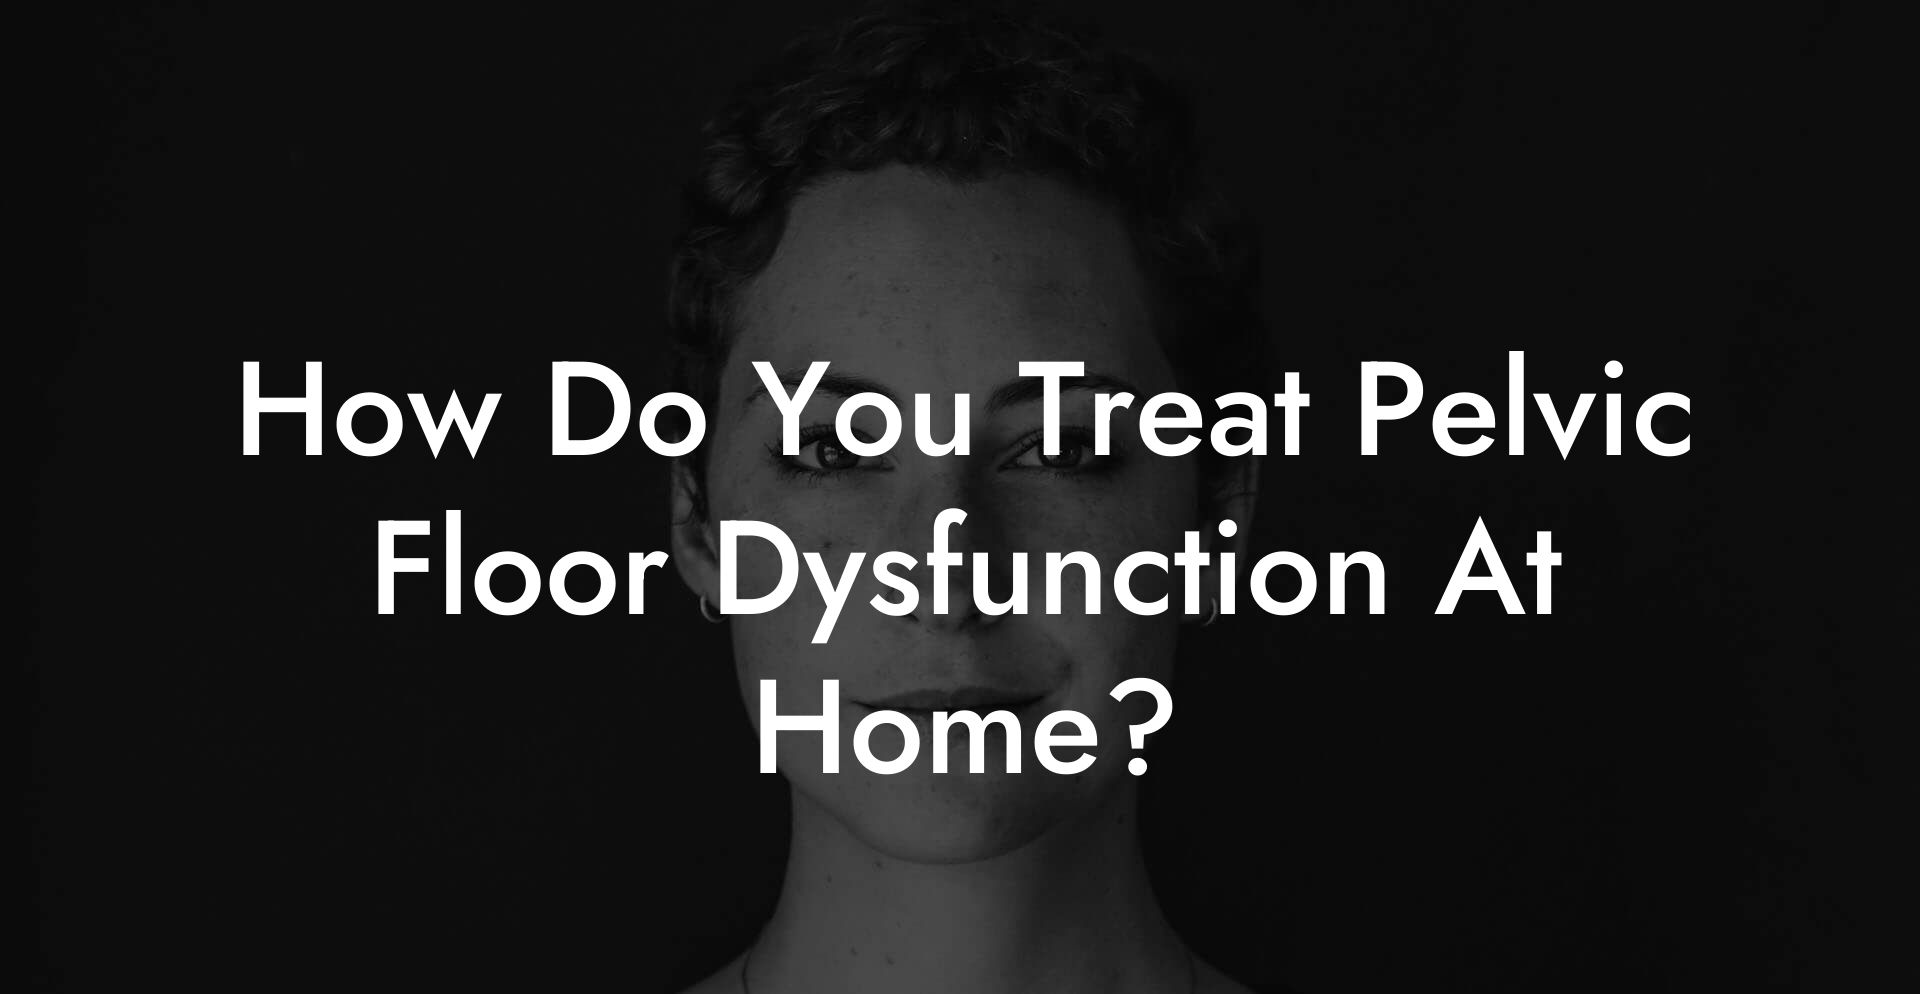 How Do You Treat Pelvic Floor Dysfunction At Home?